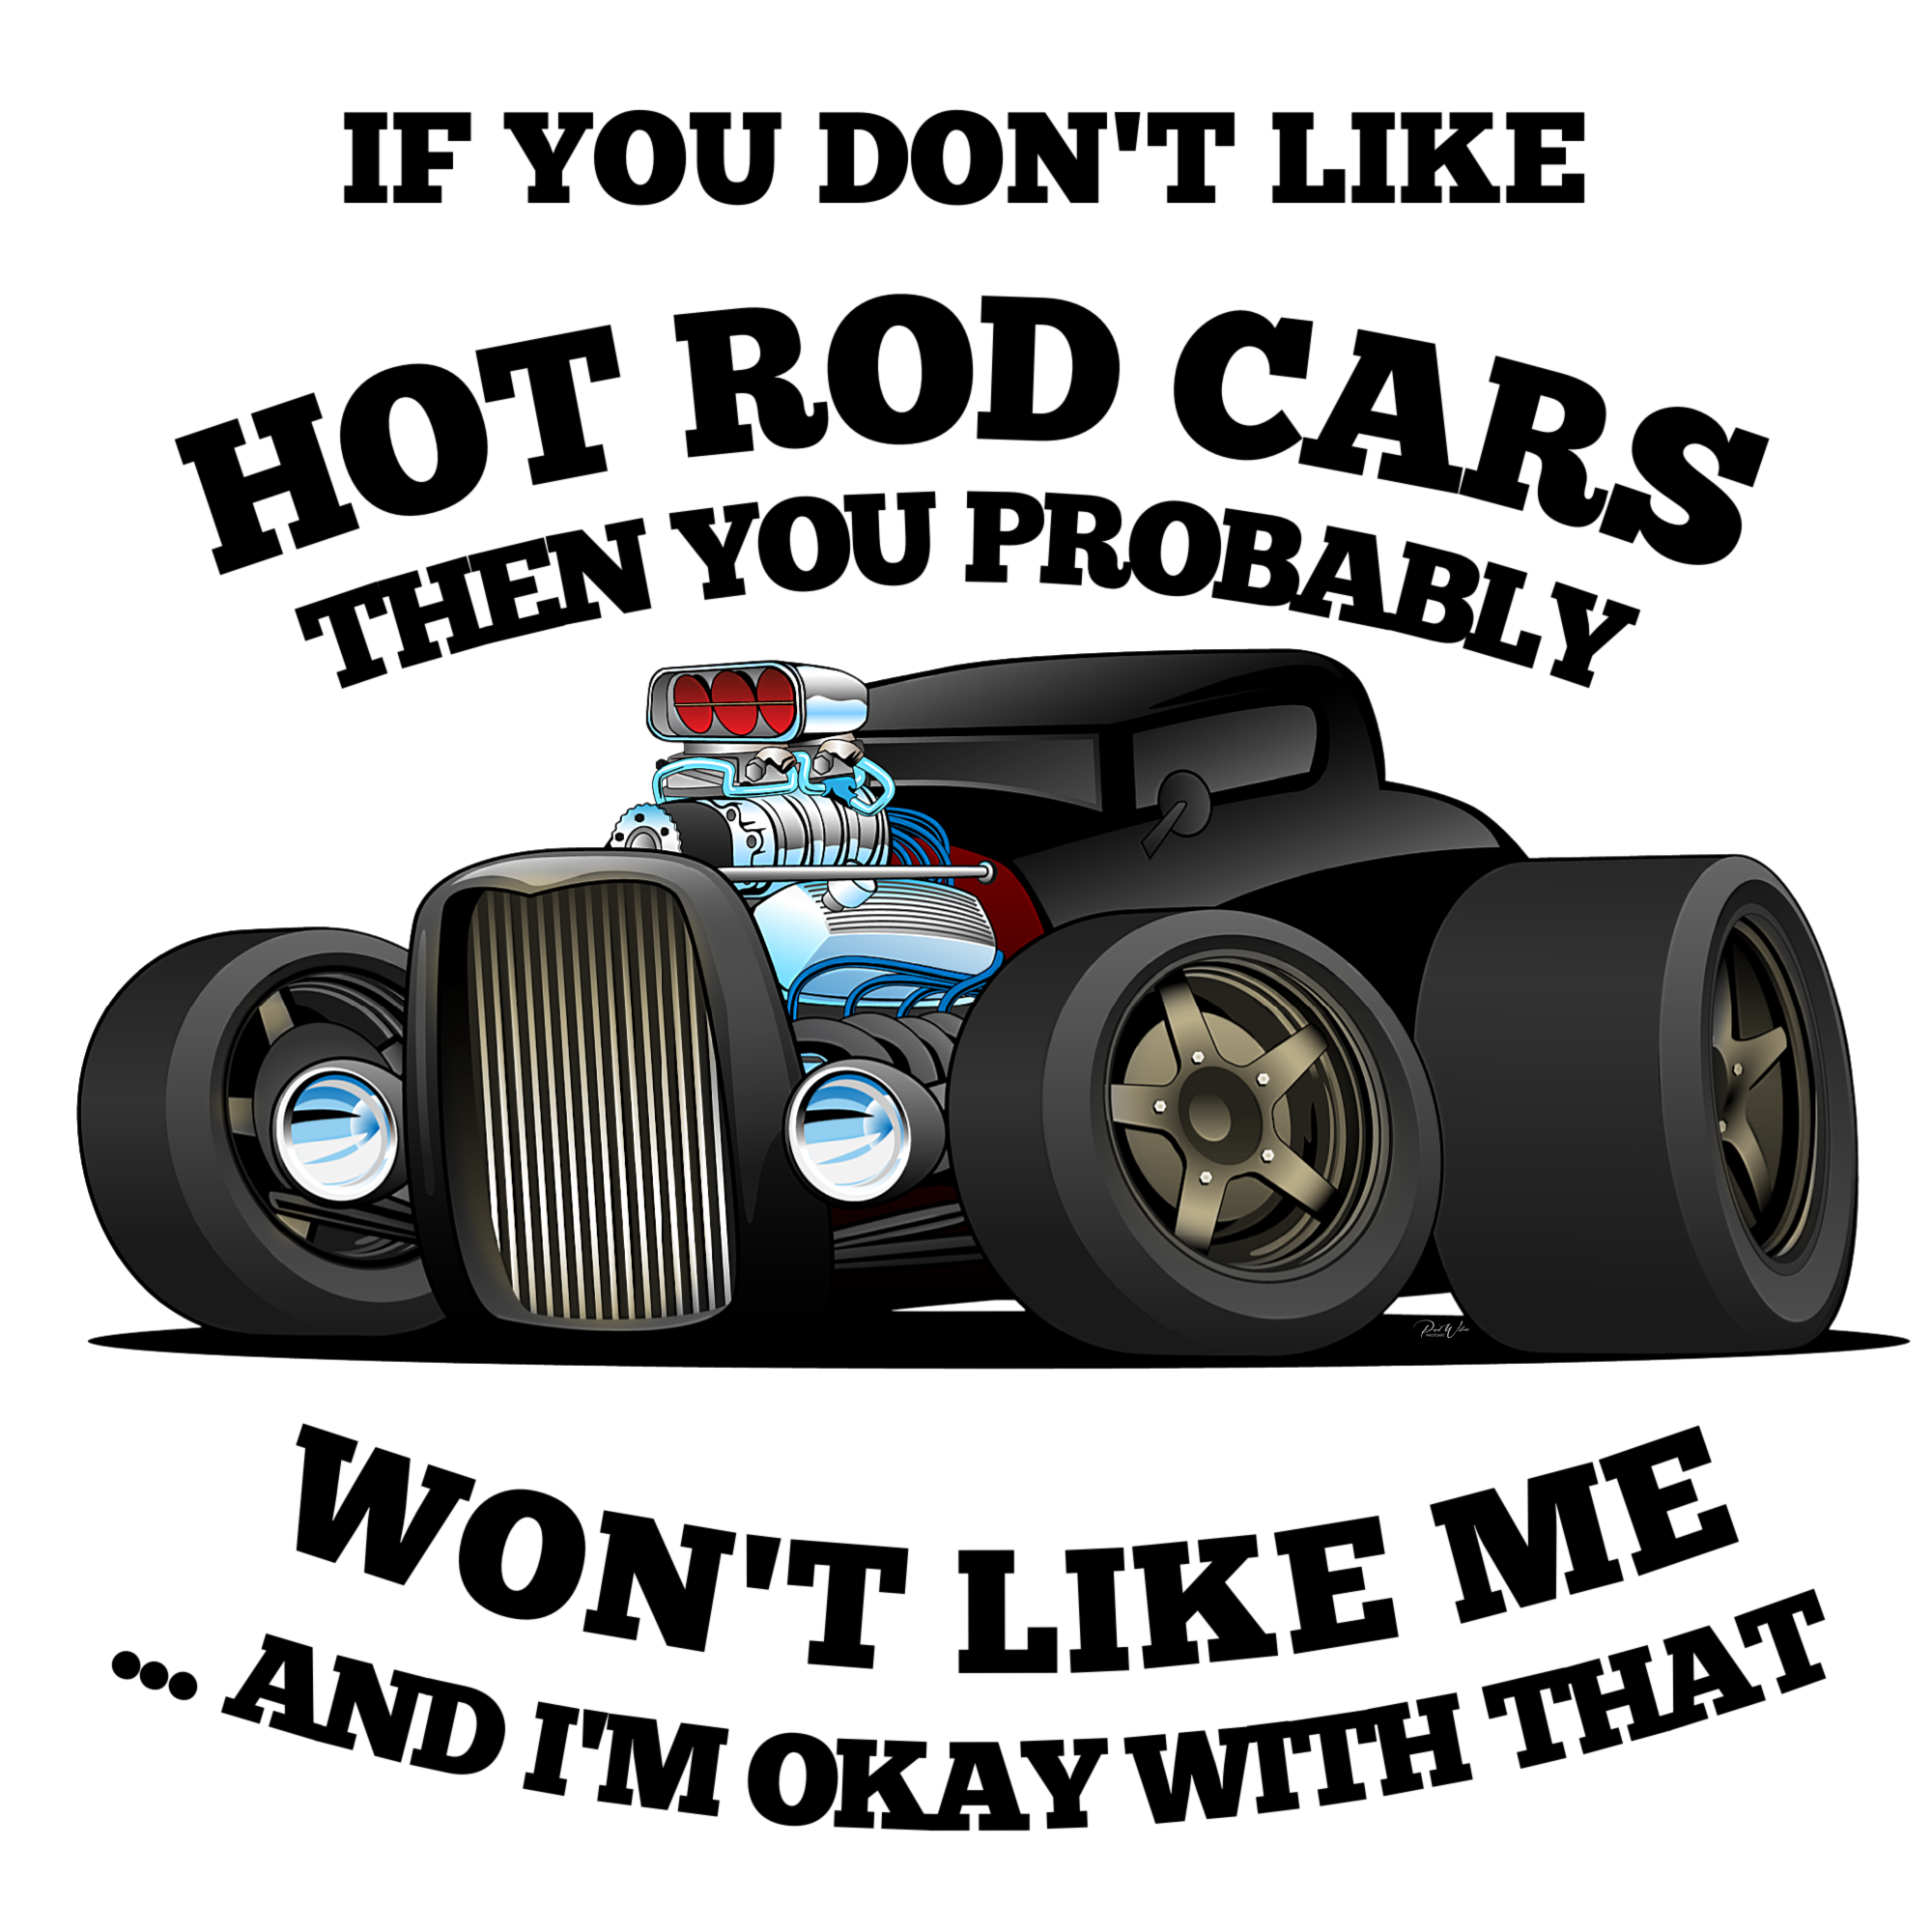 If You Don't Like Hot Rod Cars - Image